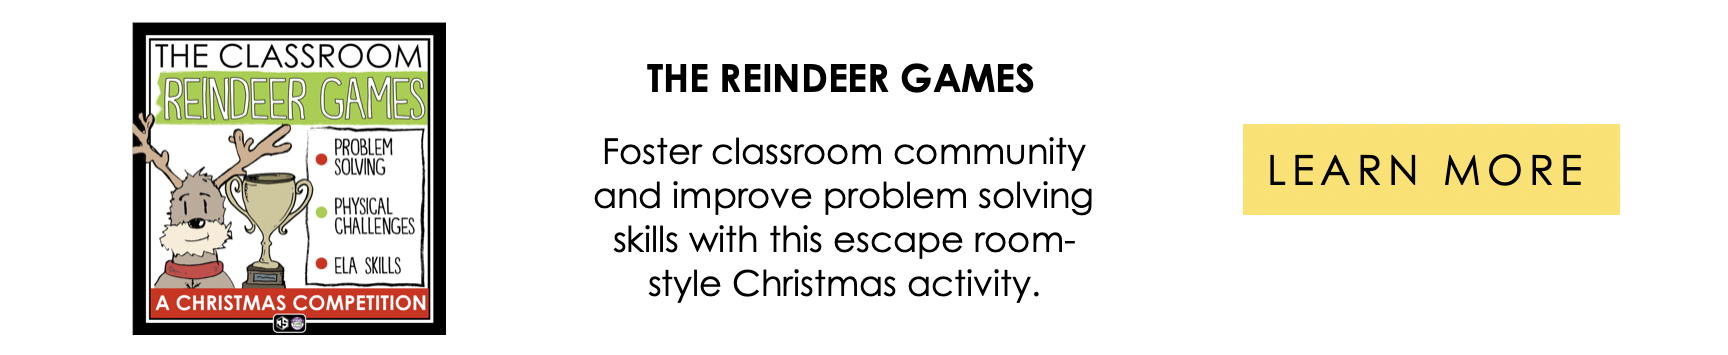 The Reindeer Games Shop This Post